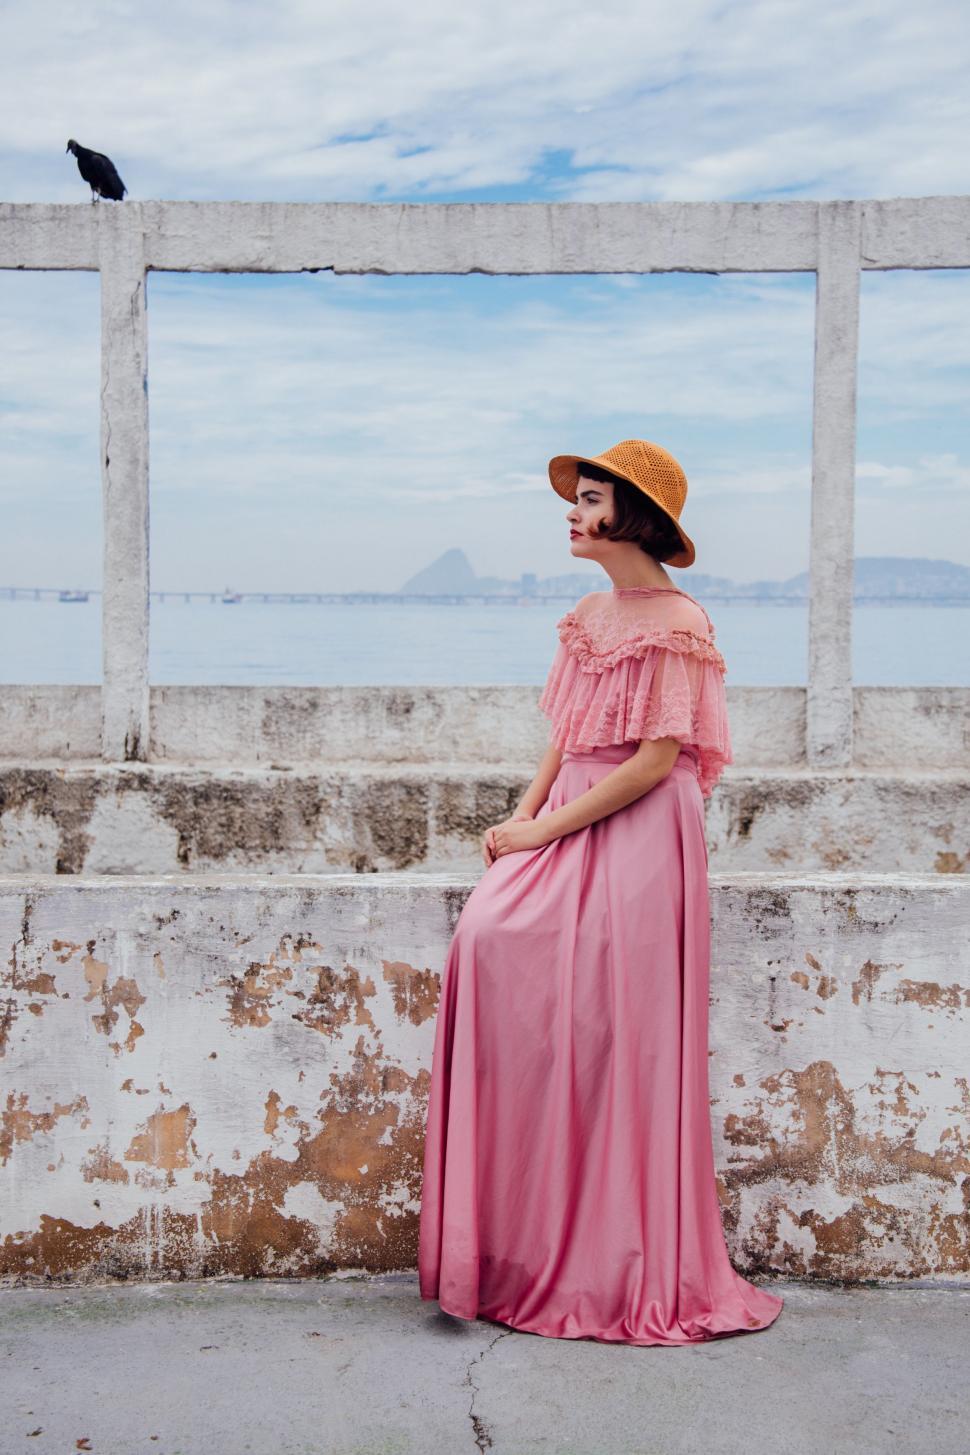 Free Image of Woman Wearing Pink Dress and Hat 